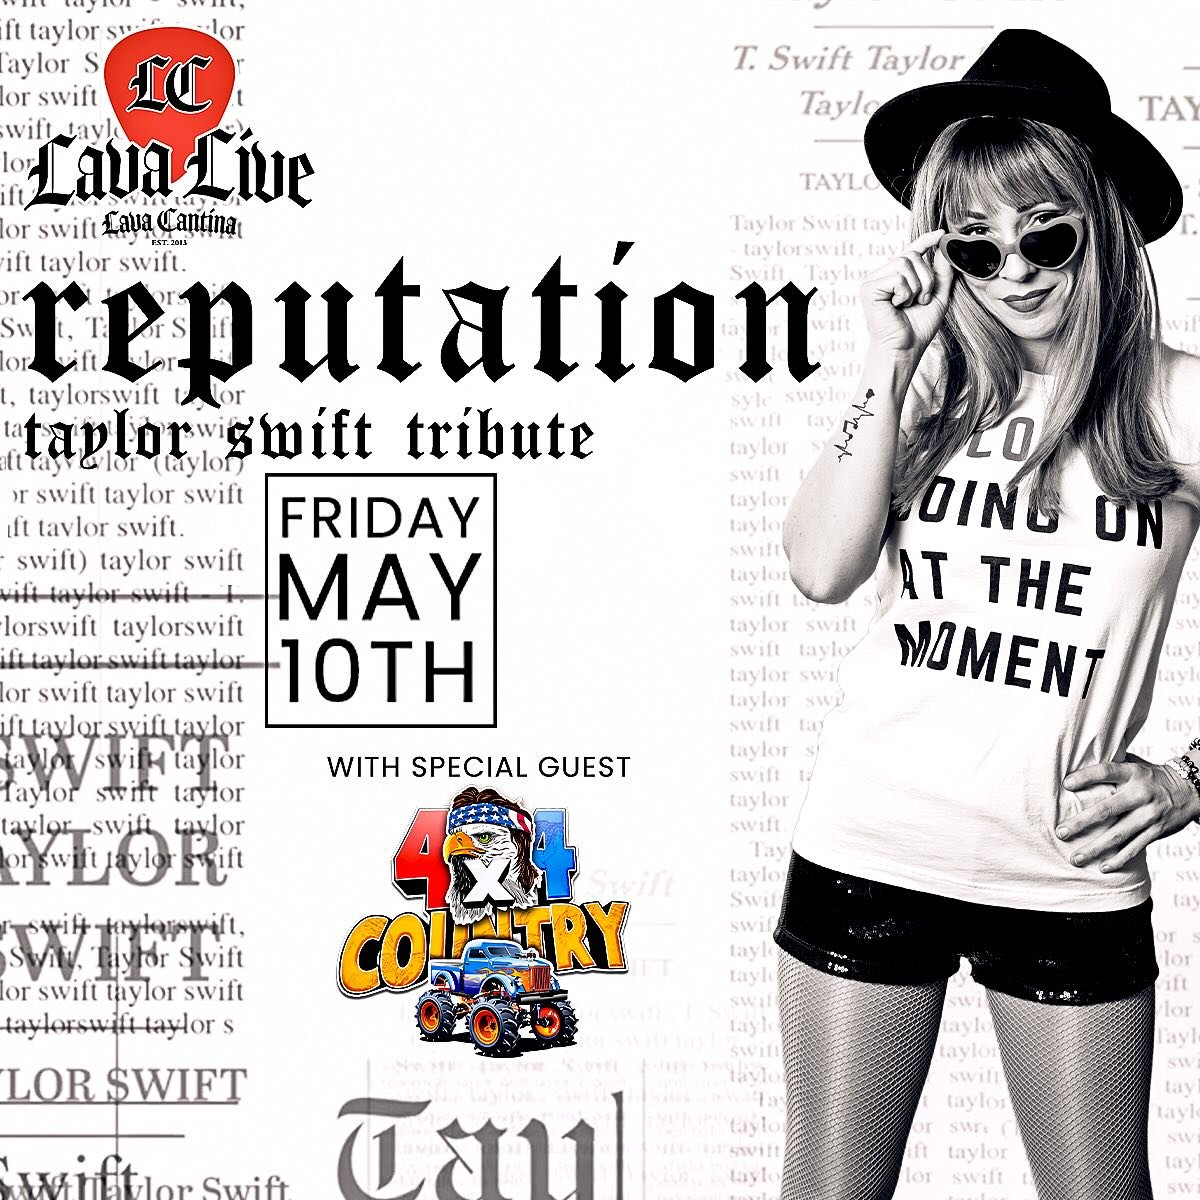 🚨 FRIDAY, MAY 10TH @lavacantinatc 🚨

REPUTATION - Taylor Swift Tribute
with 4x4 Country
🔥Lava Live at Lava Cantina
Doors 6:30 PM | Concert 8 PM
AGES: All Ages
🎟️🎟️➡️ https://tinyurl.com/2aw84ux3

💥💥💥💥💥

STRANGER THINGS LATE NIGHT TRIVIA
💀L